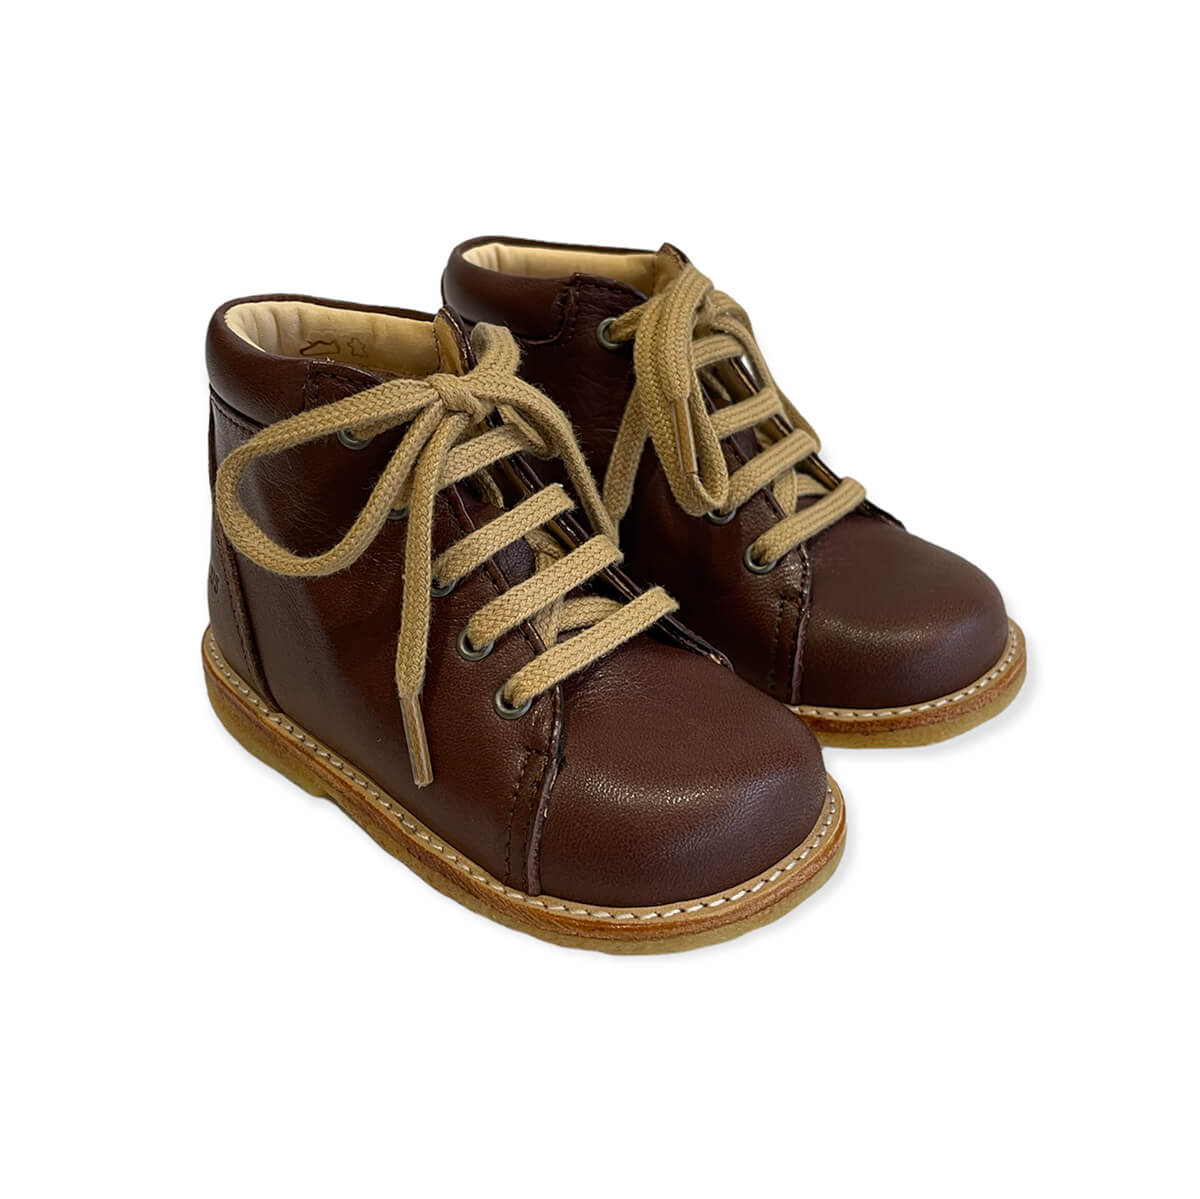 Lace Up Starter Boots in Angulus Brown by Angulus – Junior Edition